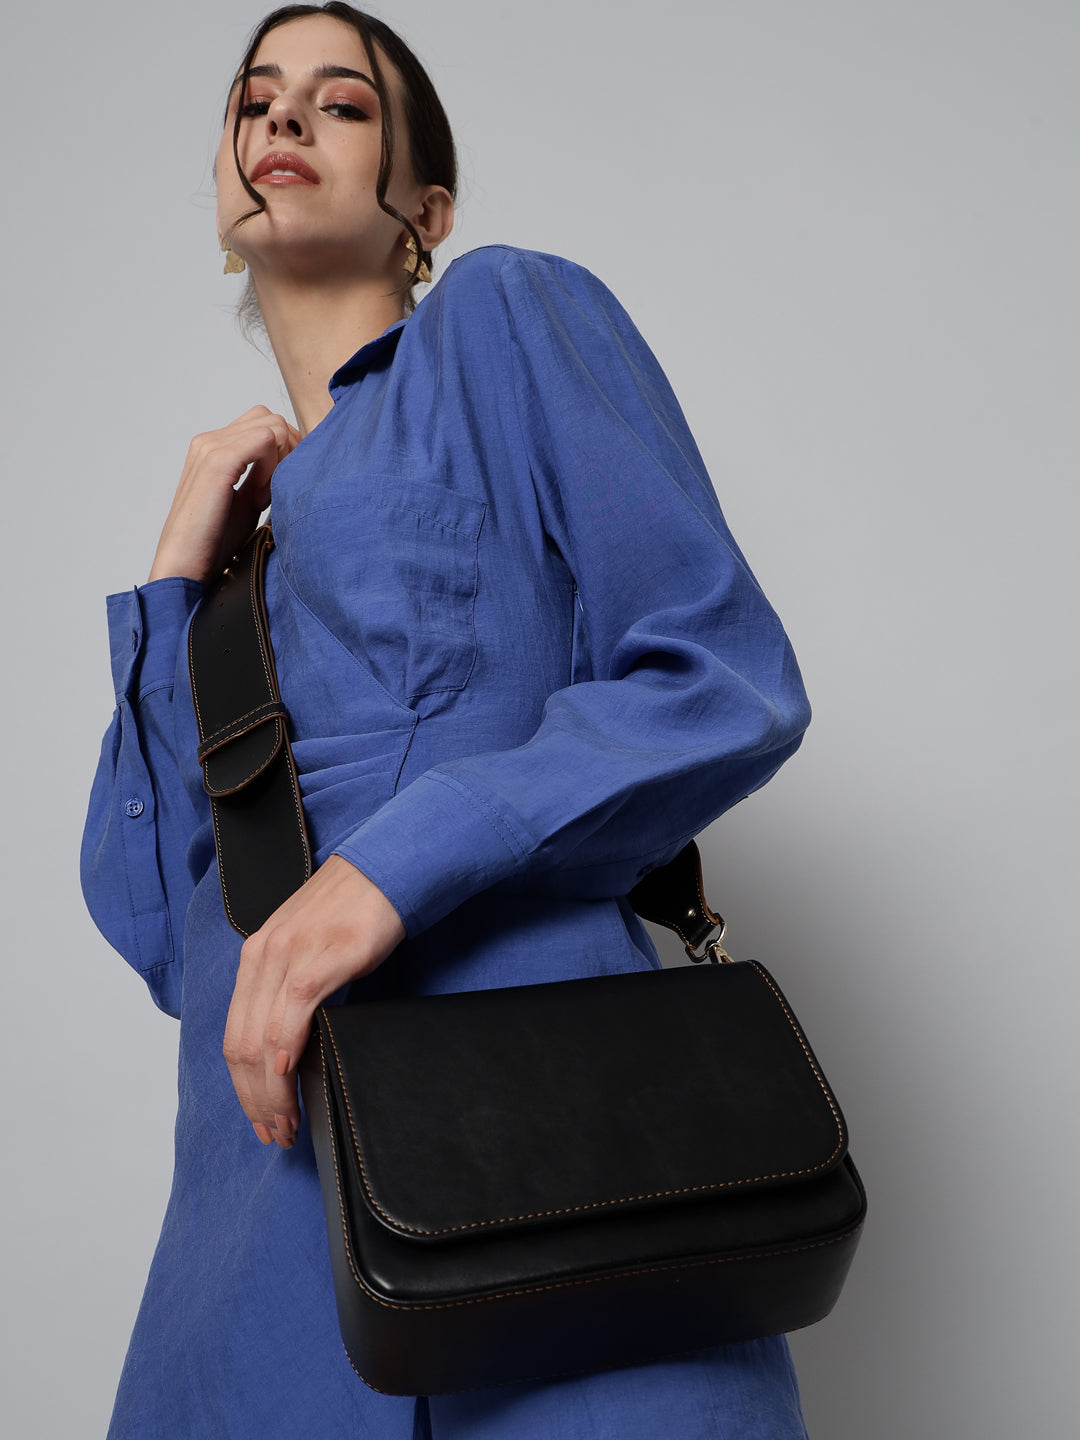 Magnifique Black Sling Bag: A Collection of Stylish and Versatile Sling Bags  for Women, Girls! Discover